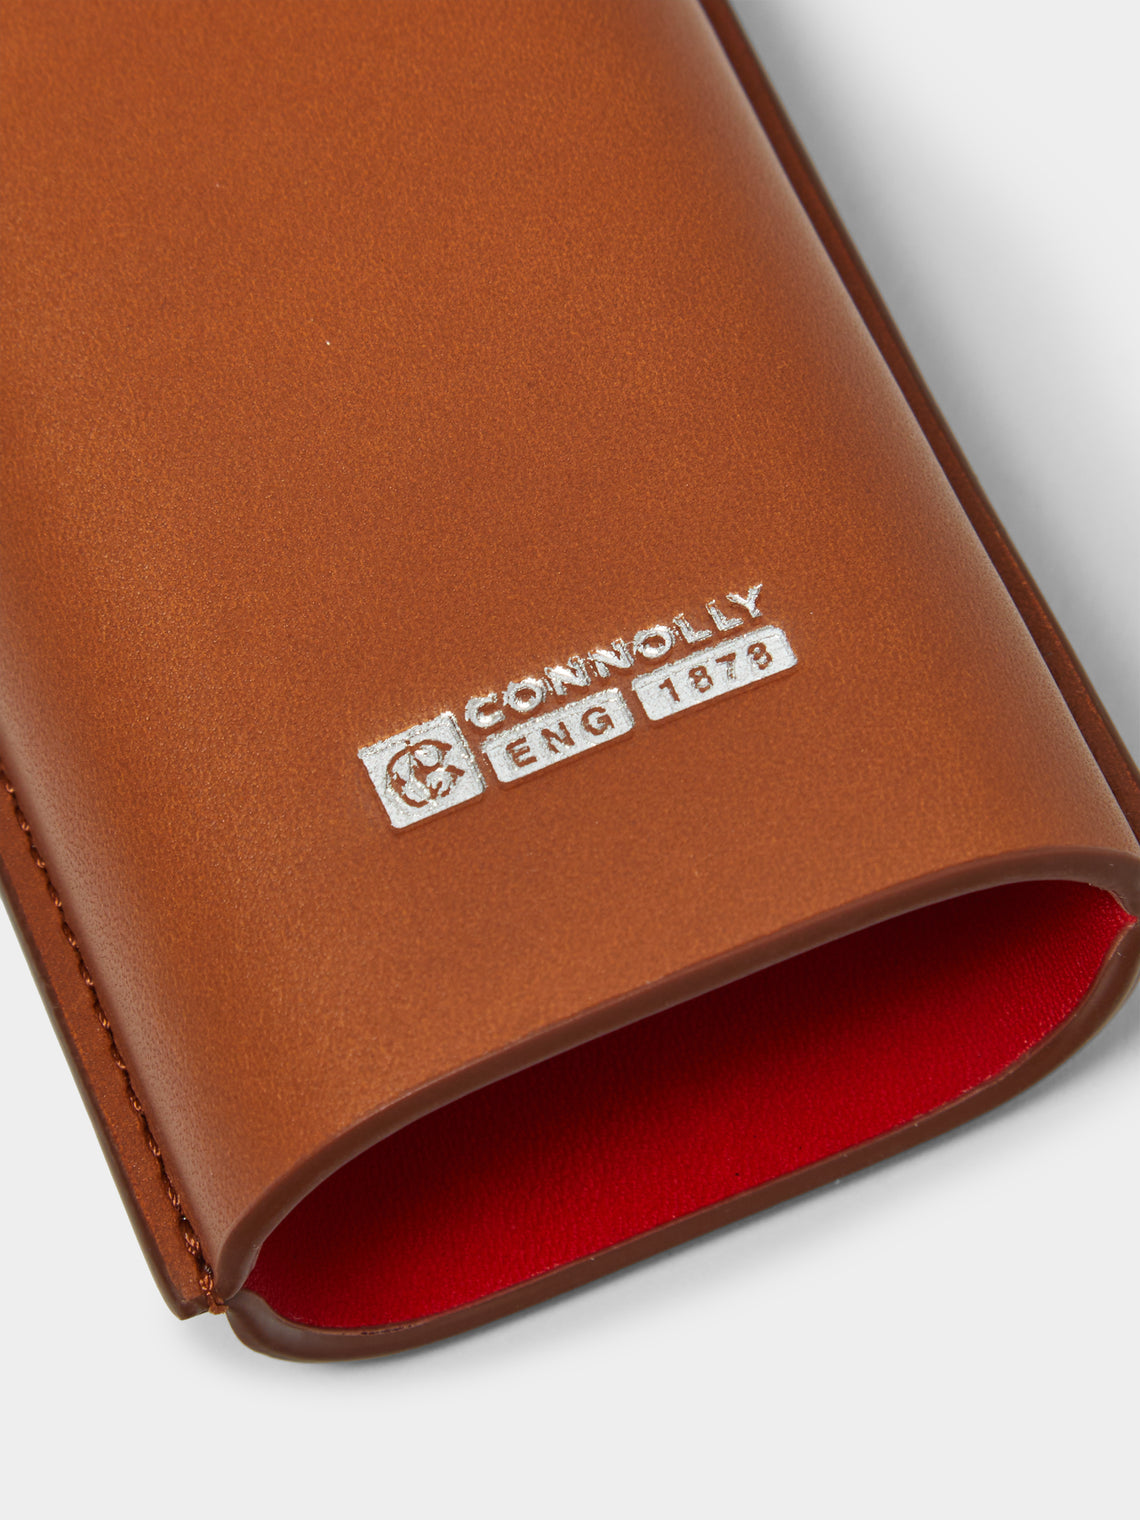 Connolly - Leather Cigar Case -  - ABASK